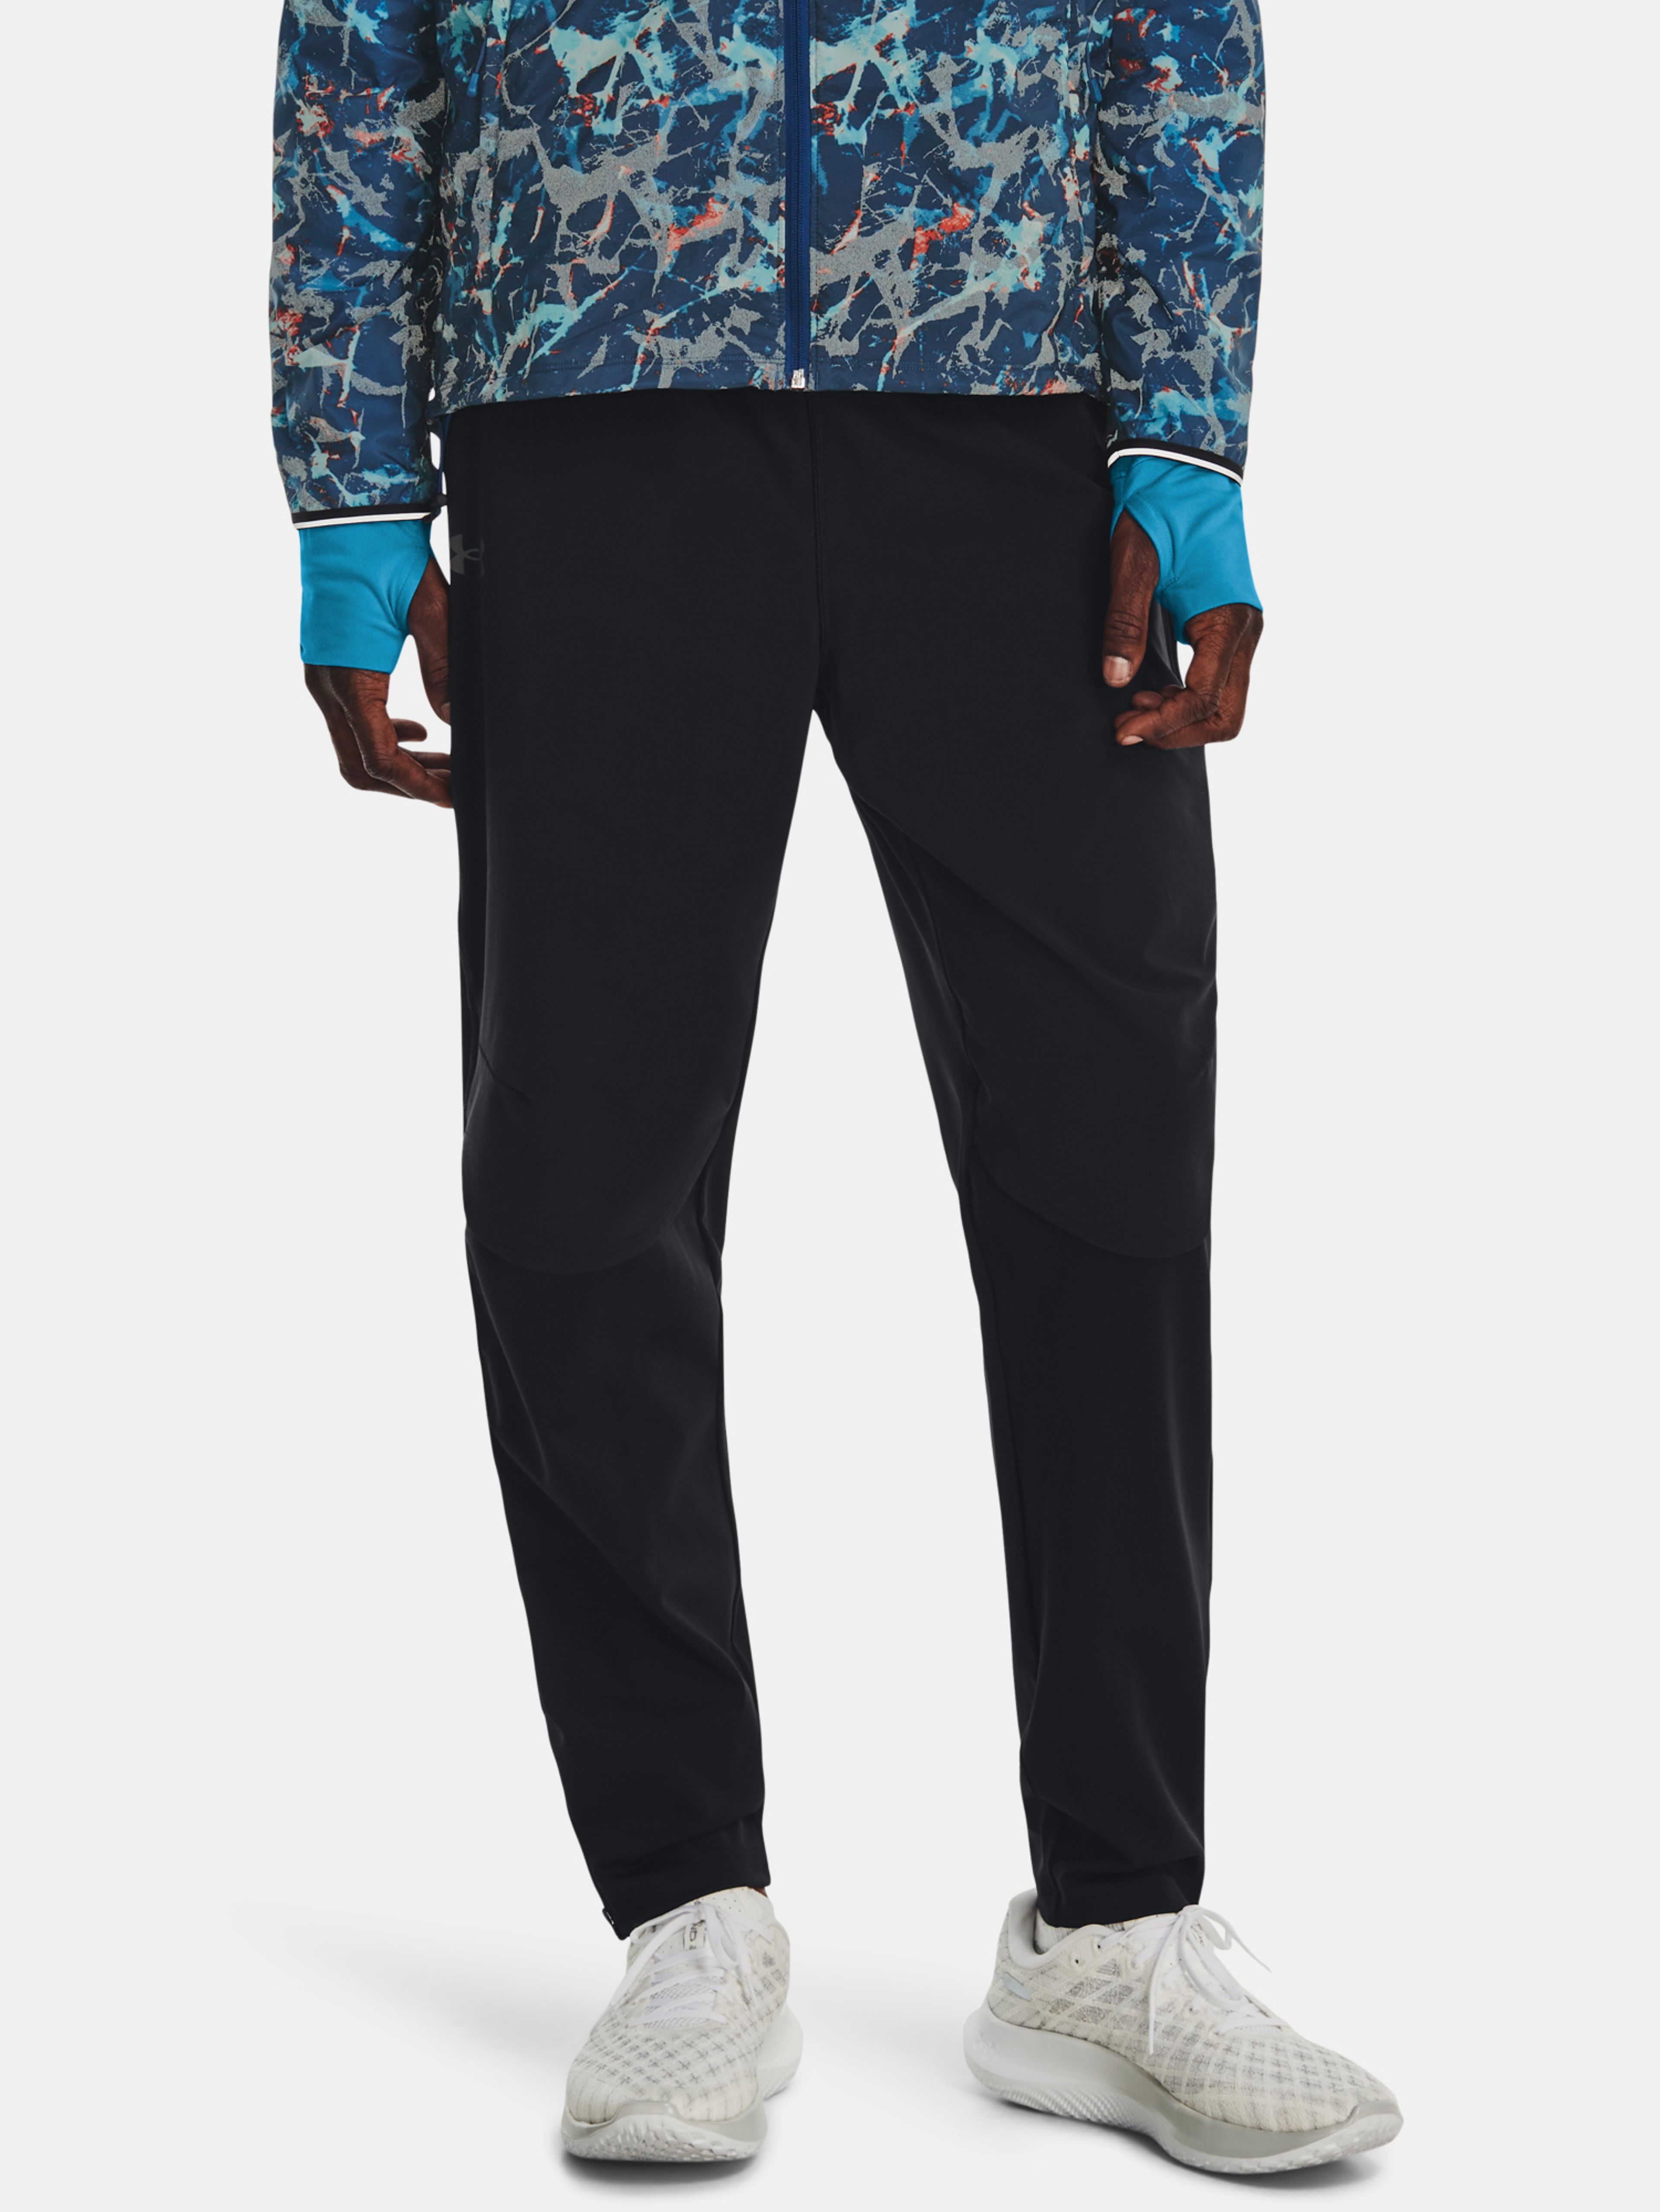 Kalhoty Under Armour UA STORM OUTRUN COLD PANT-BLK